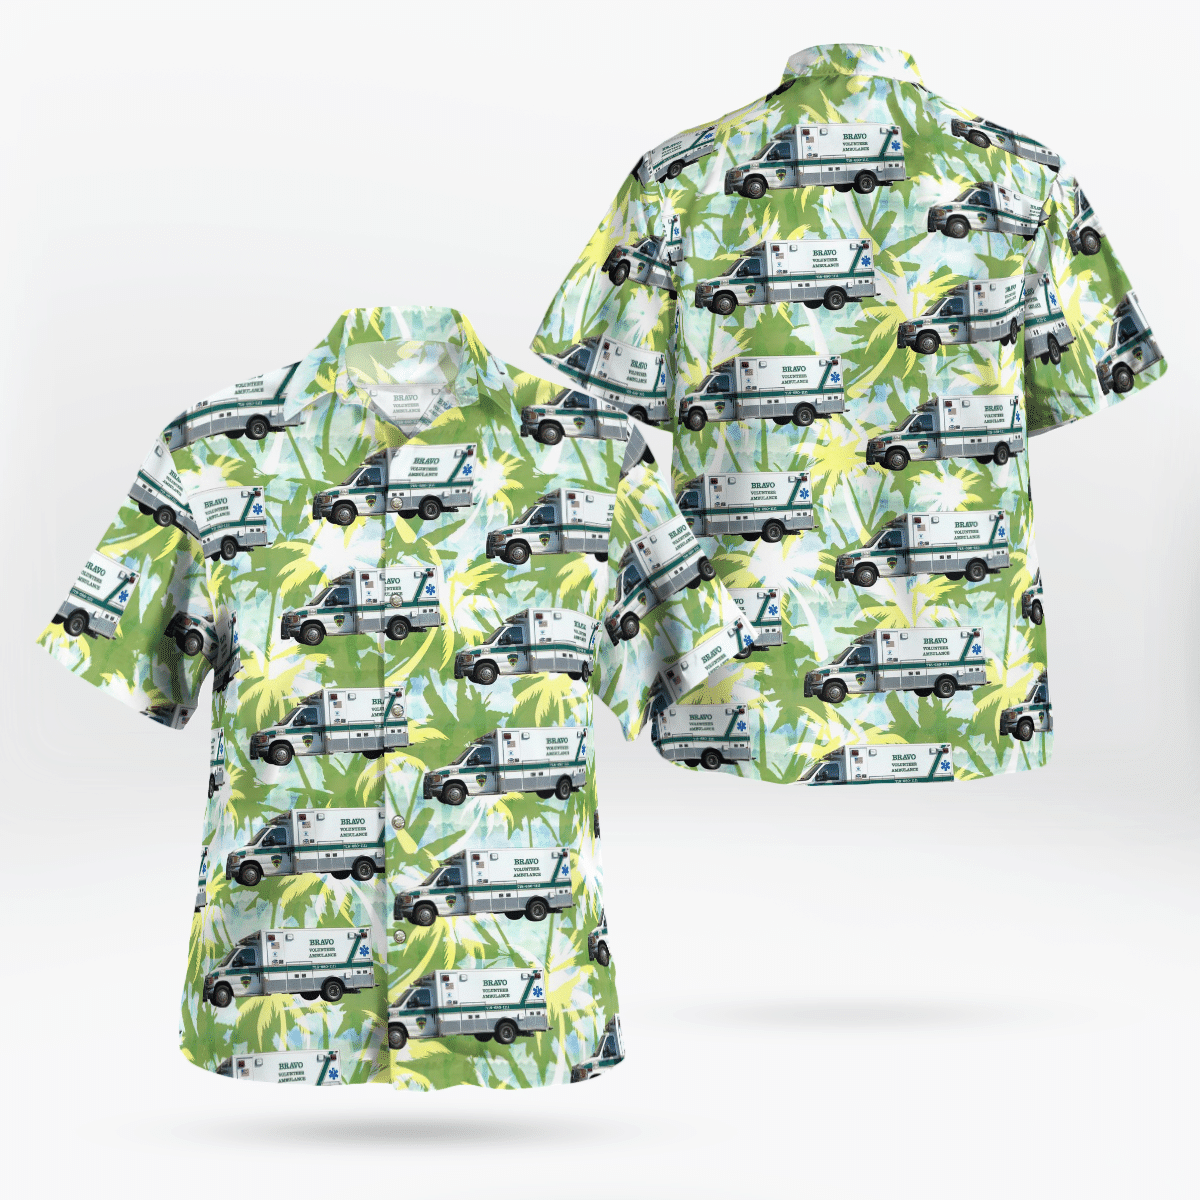 Shop now to find the perfect Hawaii Shirt for your hobby 197